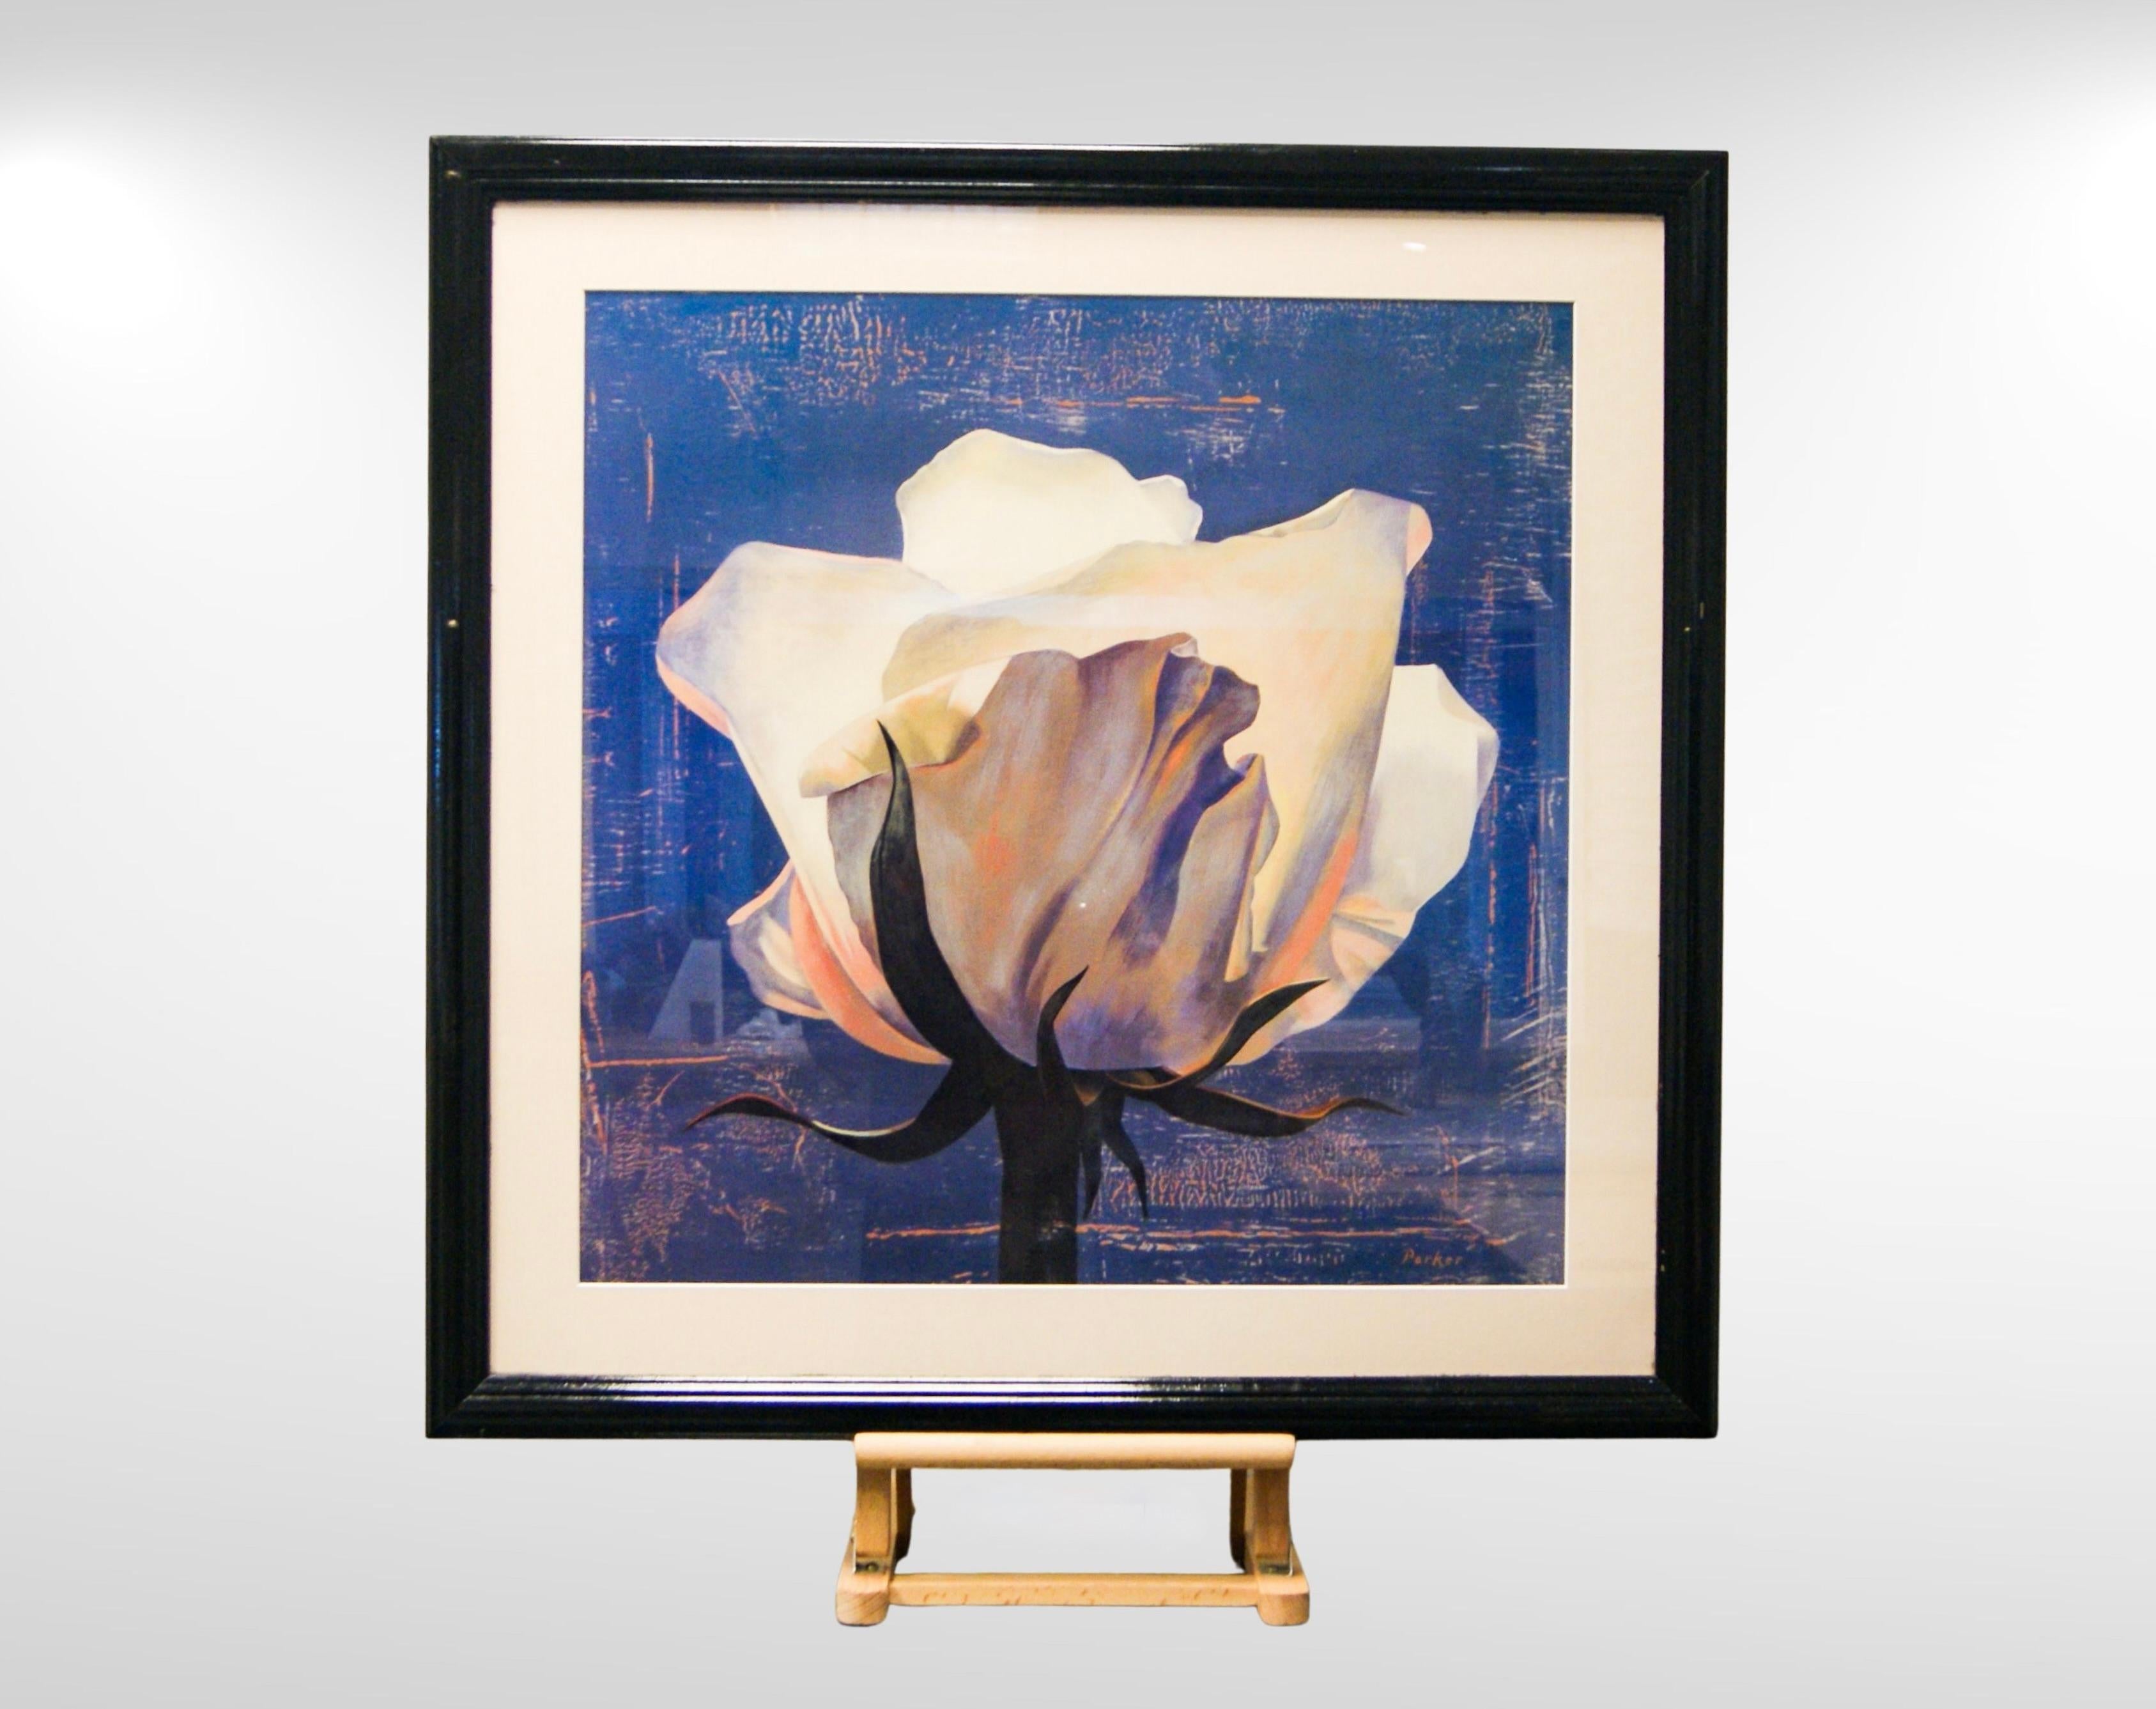 Other Framed Art Prints by Curtis Parker Glowing Magnolia & Glowing White Rose For Sale